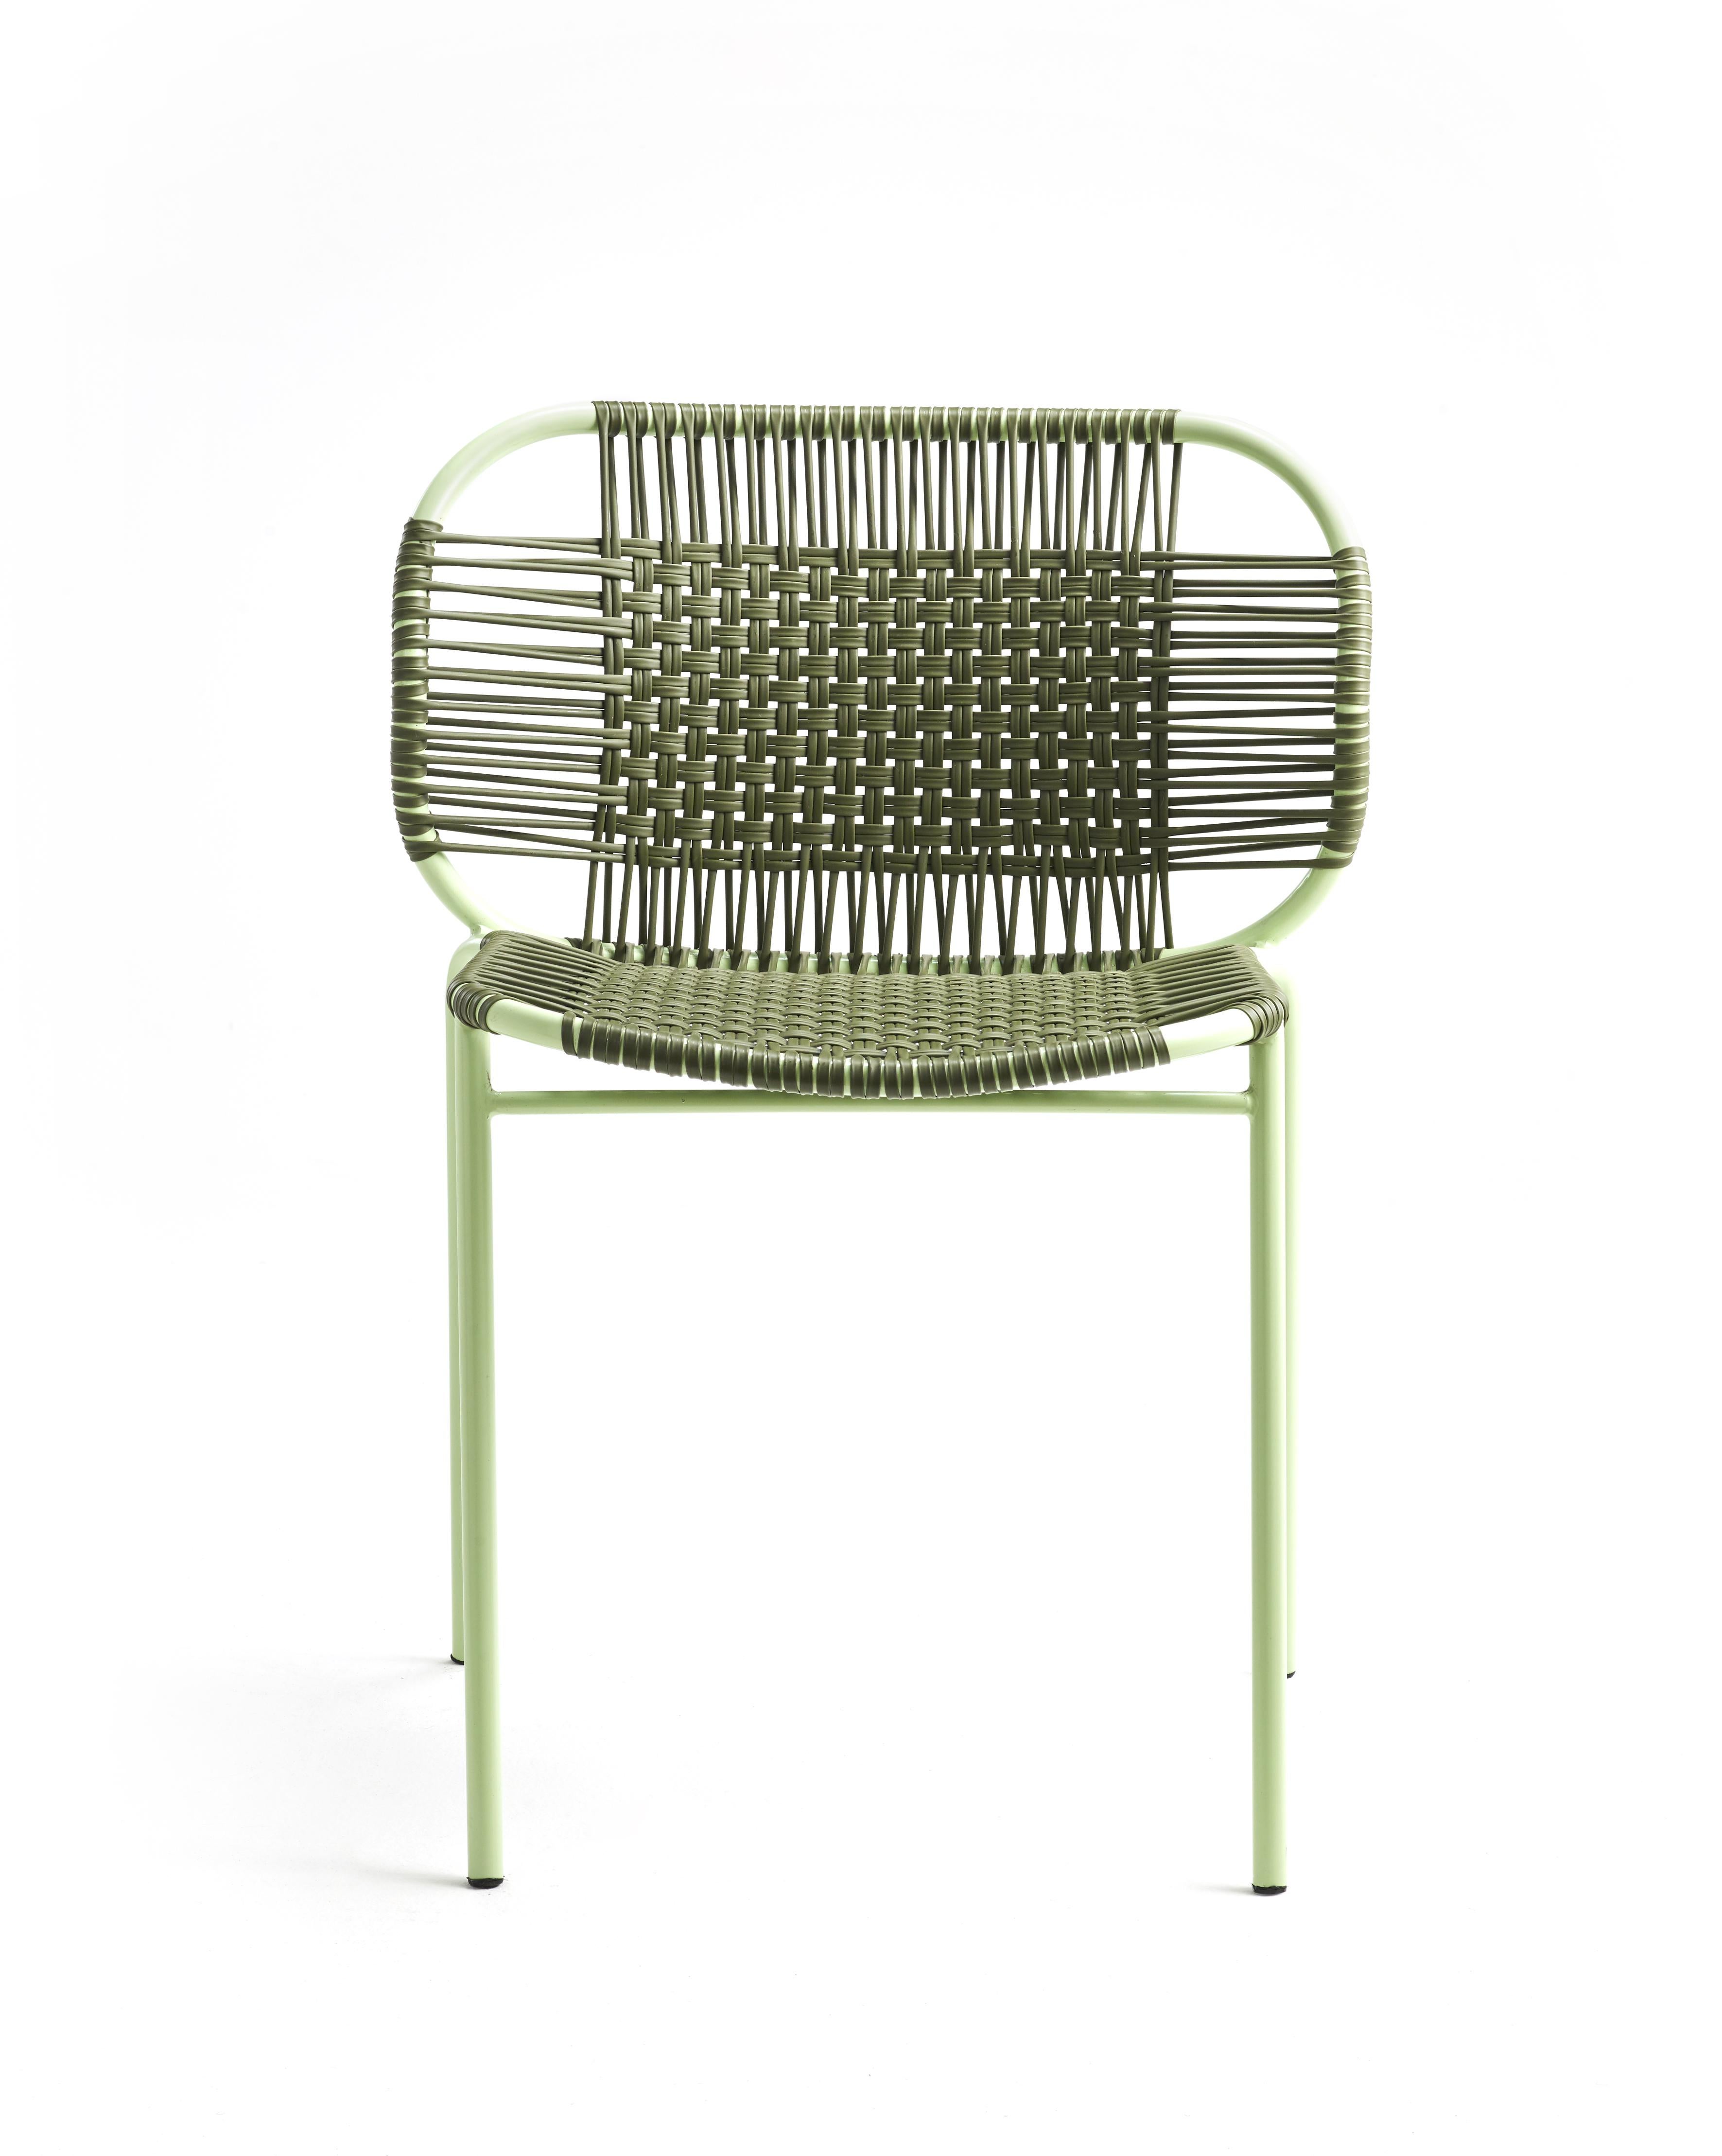 Olive Cielo stacking chair by Sebastian Herkner
Materials: PVC strings, powder-coated steel frame. 
Technique: Made from recycled plastic and weaved by local craftspeople in Cartagena, Colombia. 
Dimensions: W 56 x D 51.4 x H 78 cm 
Also